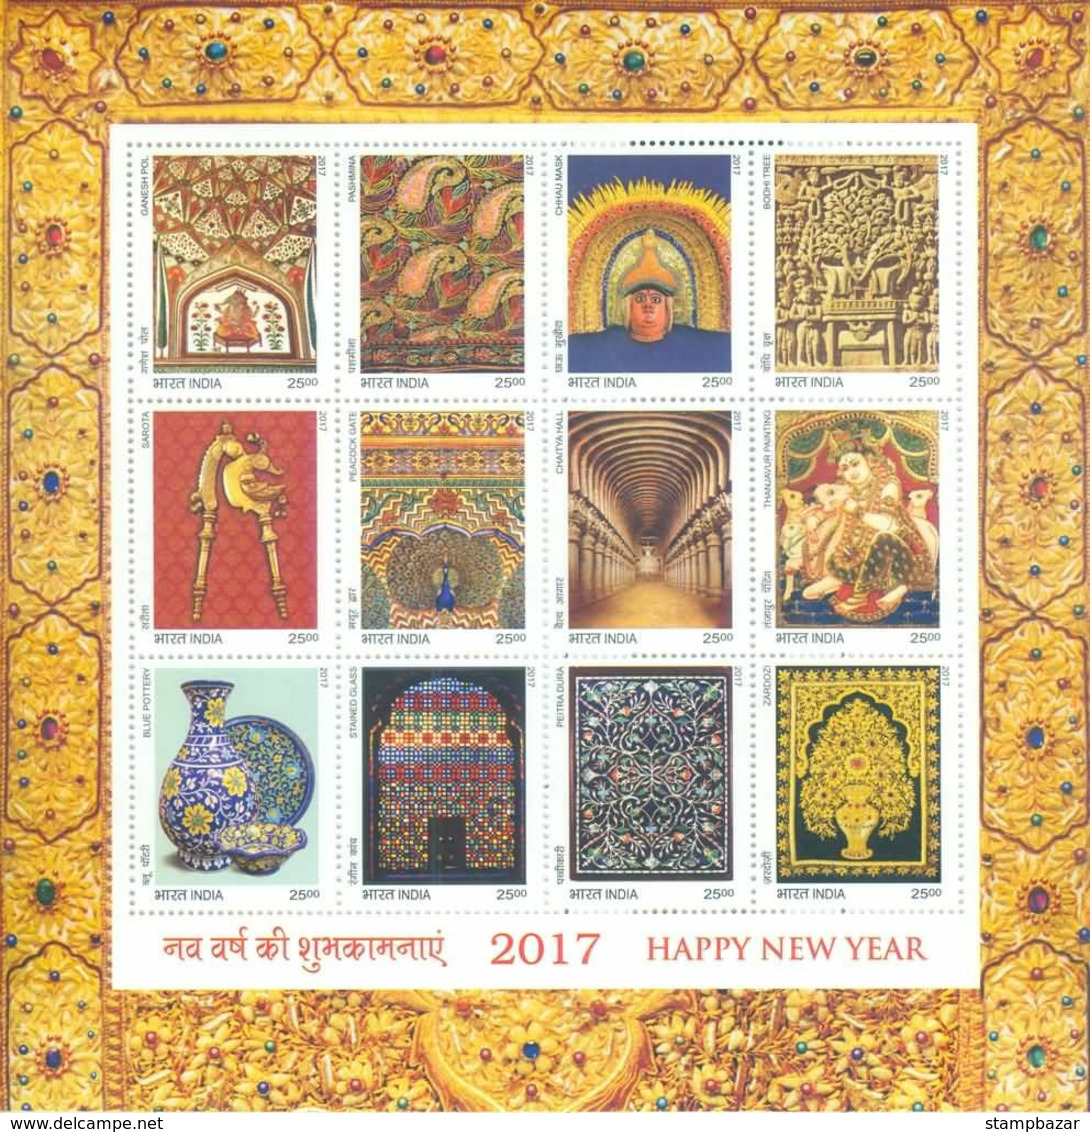 India 2017 Complete Year Pack Set of Stamps Assorted themes Birds 218v